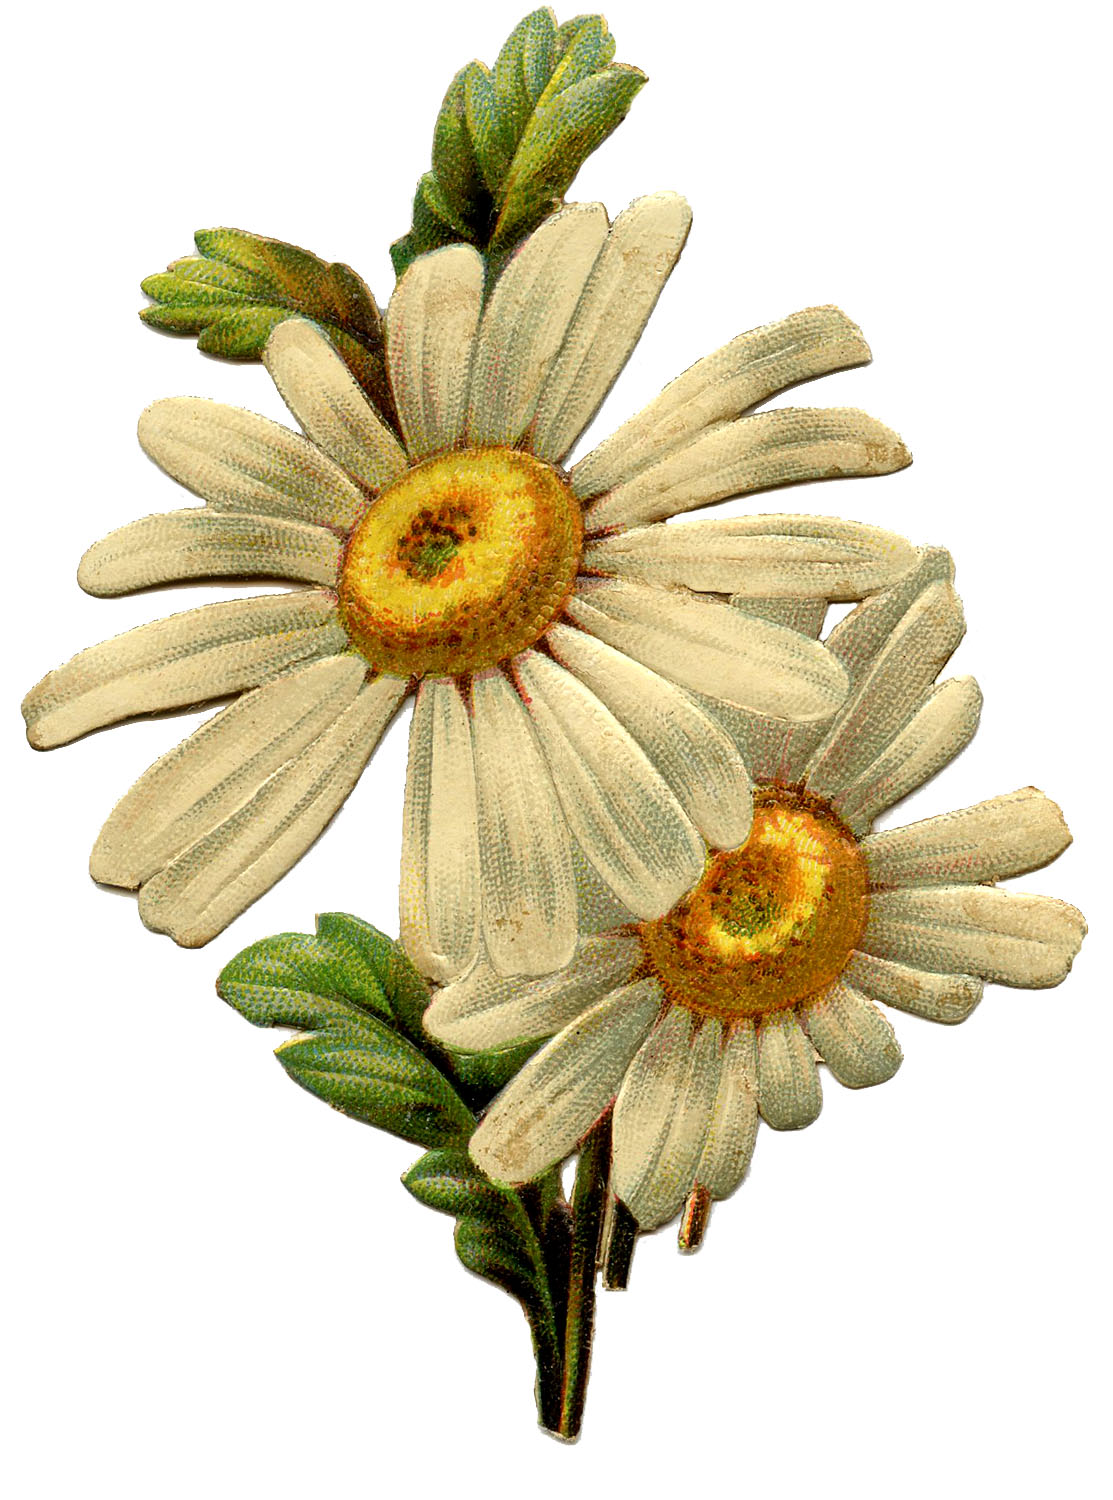 12 Daisy Images - Lovely! - The Graphics Fairy